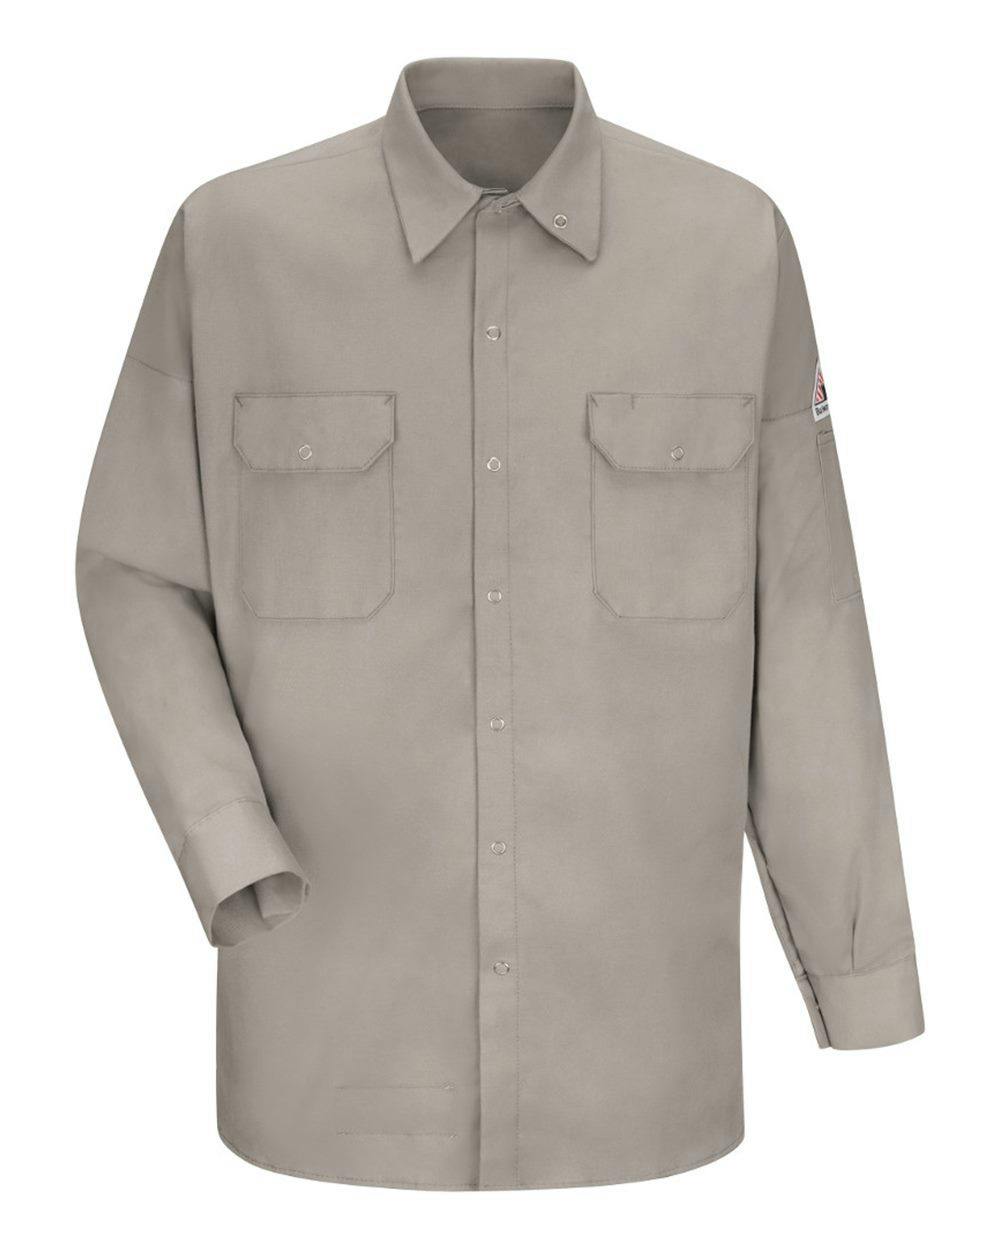 Image for Welding Work Shirt - SWW2